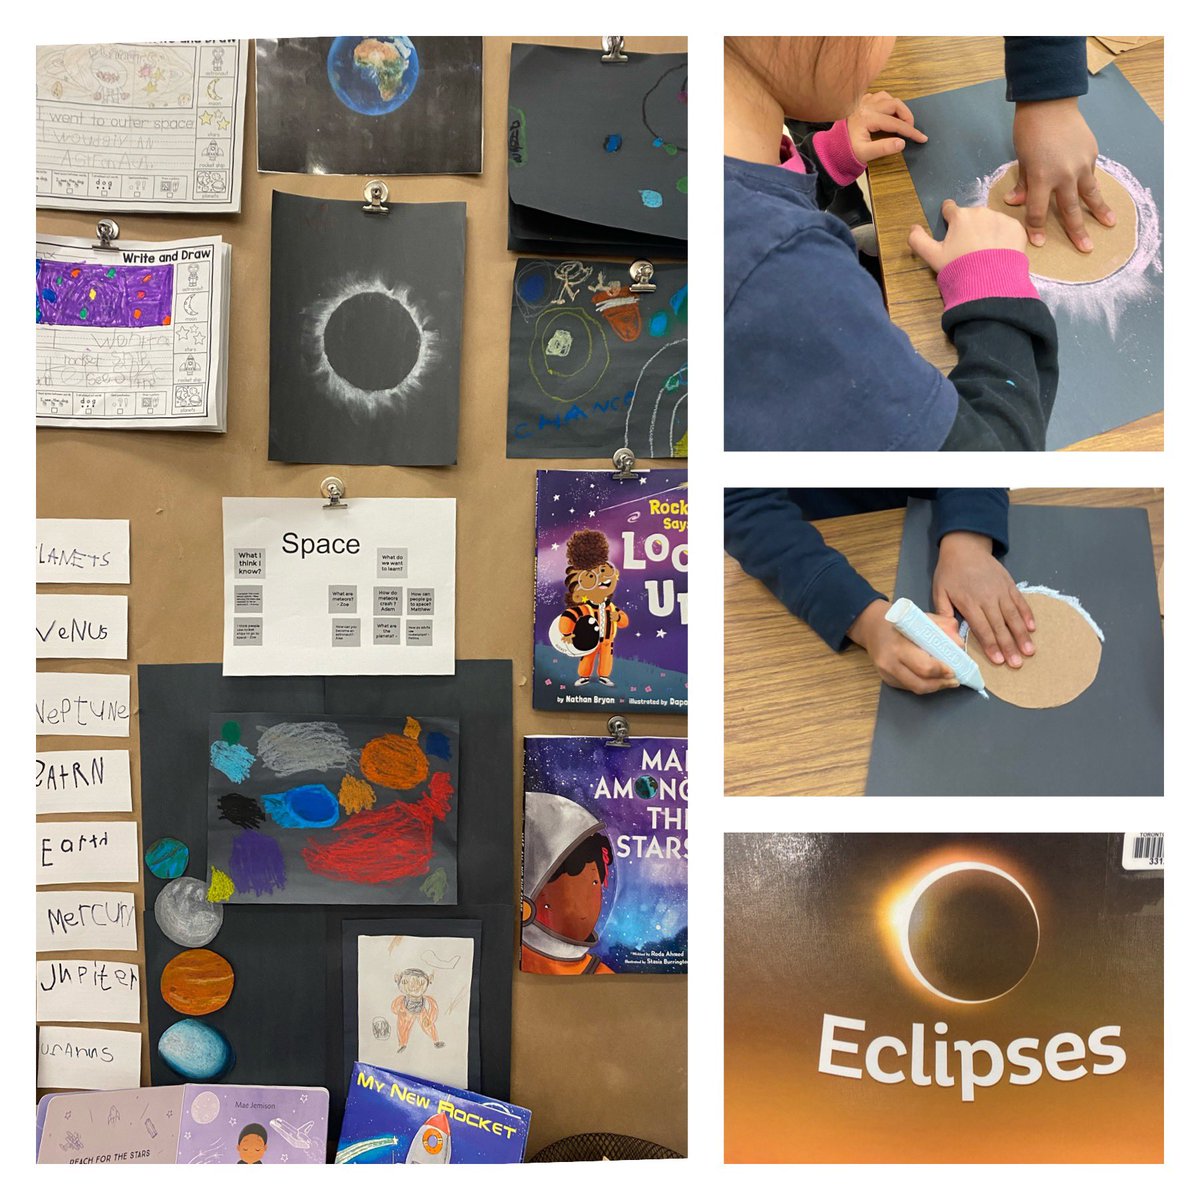 Over the last few weeks our learners have taken an interest in space . One learner shared that he was excited for the upcoming Solar eclipse. We will take this opportunity to learn more. @LC2_TDSB #tdsb @tdsb